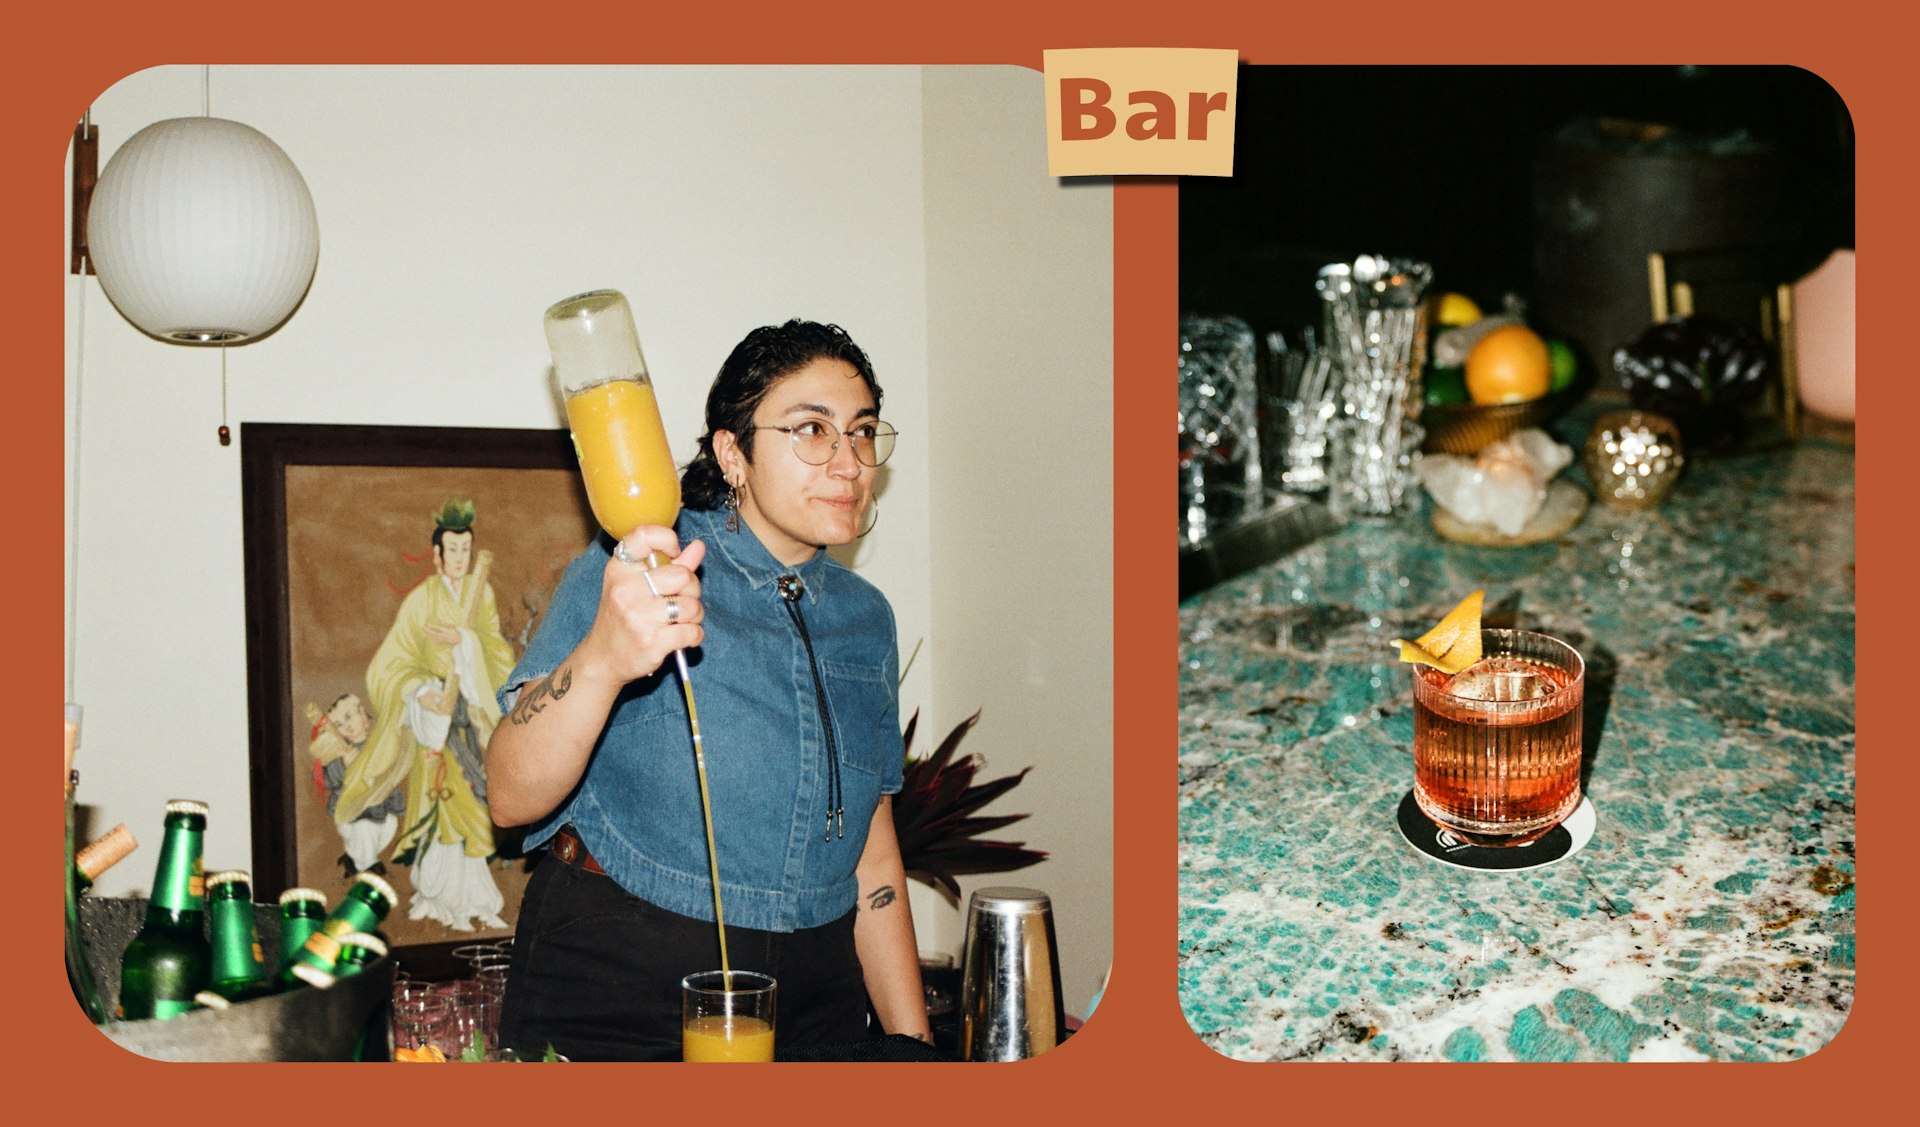 L: A bartender prepares a drink behind bar counter. R: Close-up of wine and cocktails on a stylish table